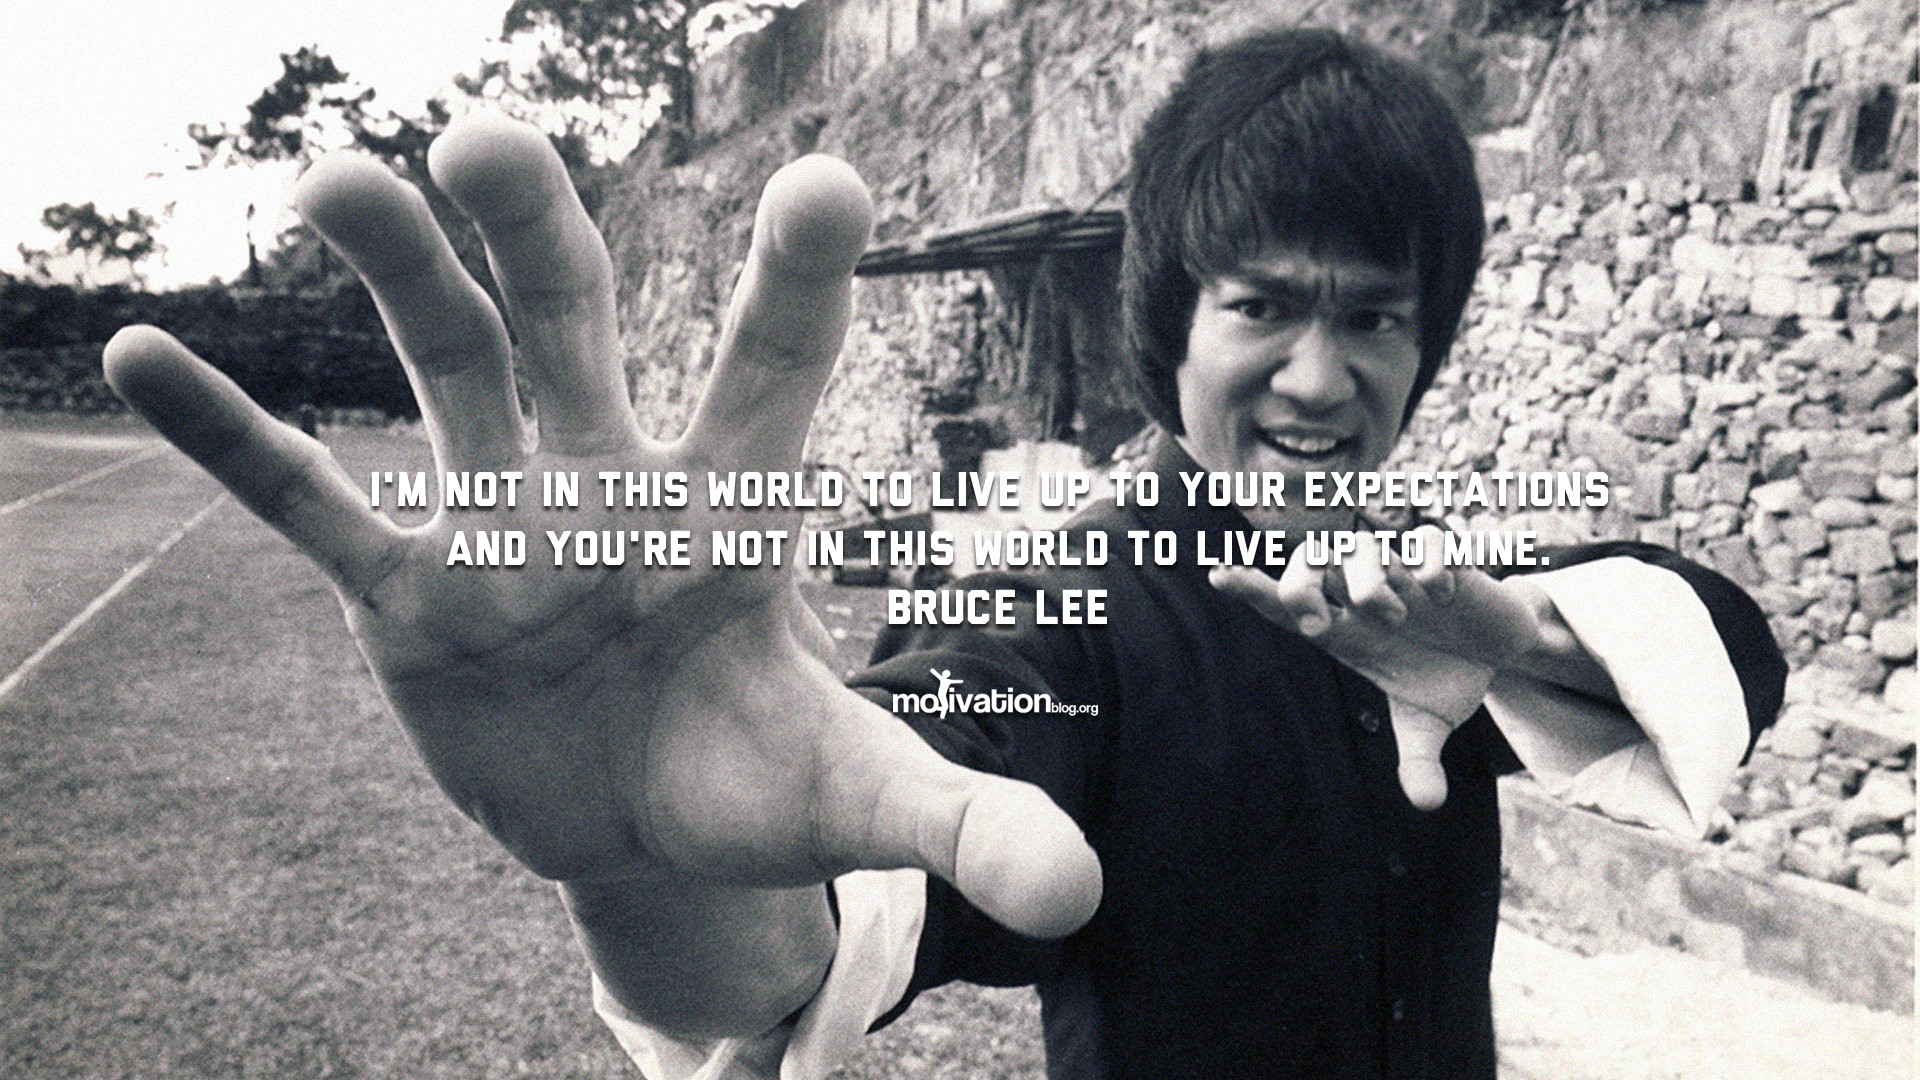 1920x1080 Bruce Lee quotes wallpaper. “